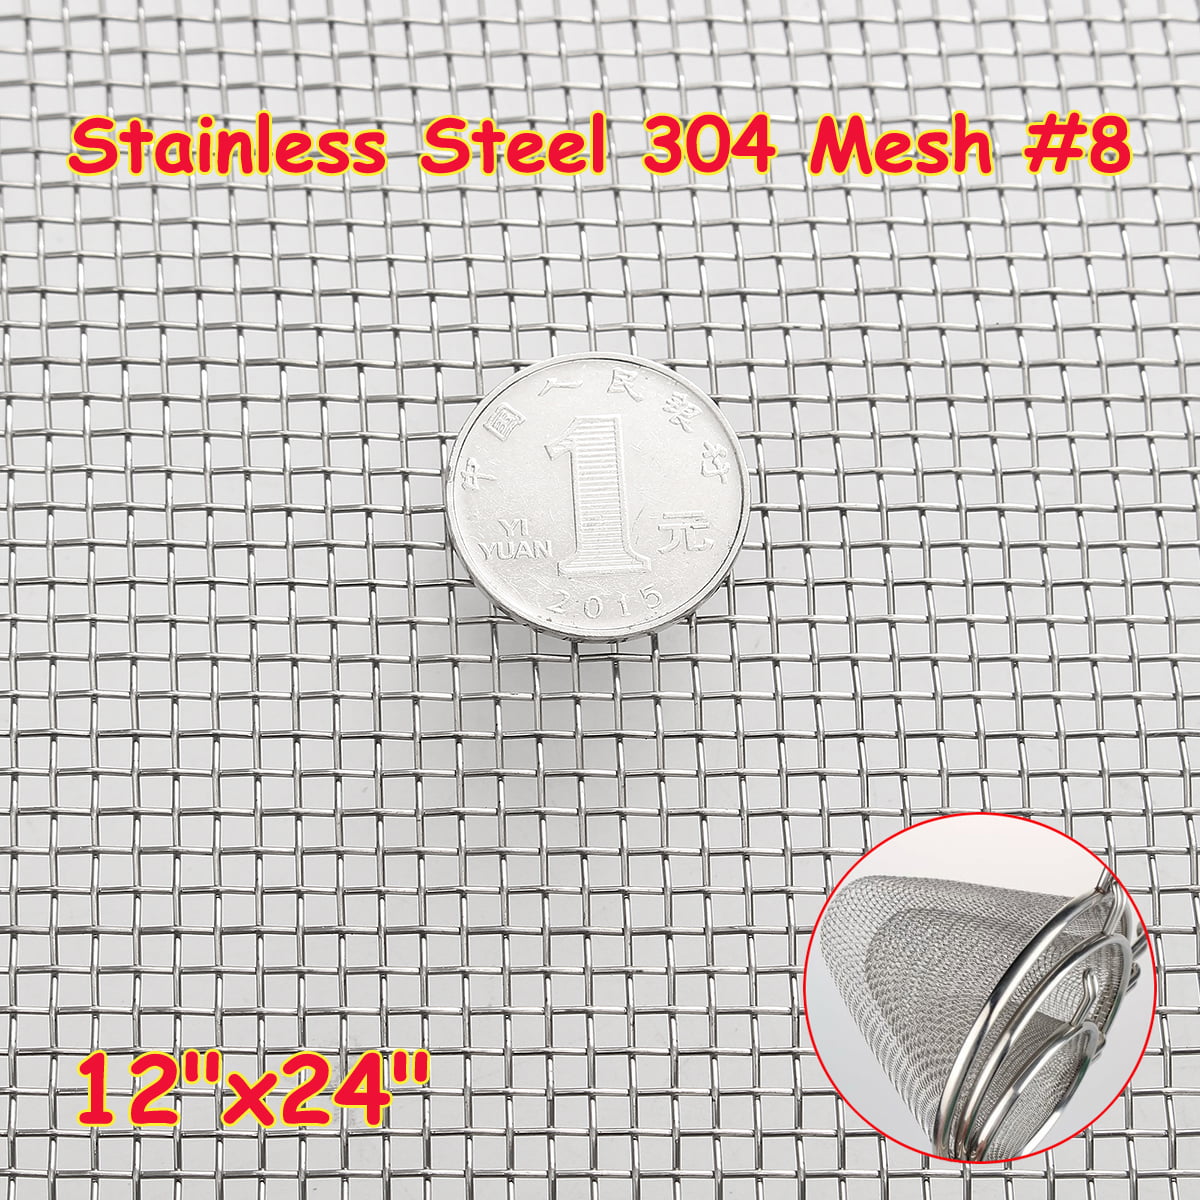 Stainless Steel 304 Mesh #8 .035 Wire Cloth Screen 4”x24” 